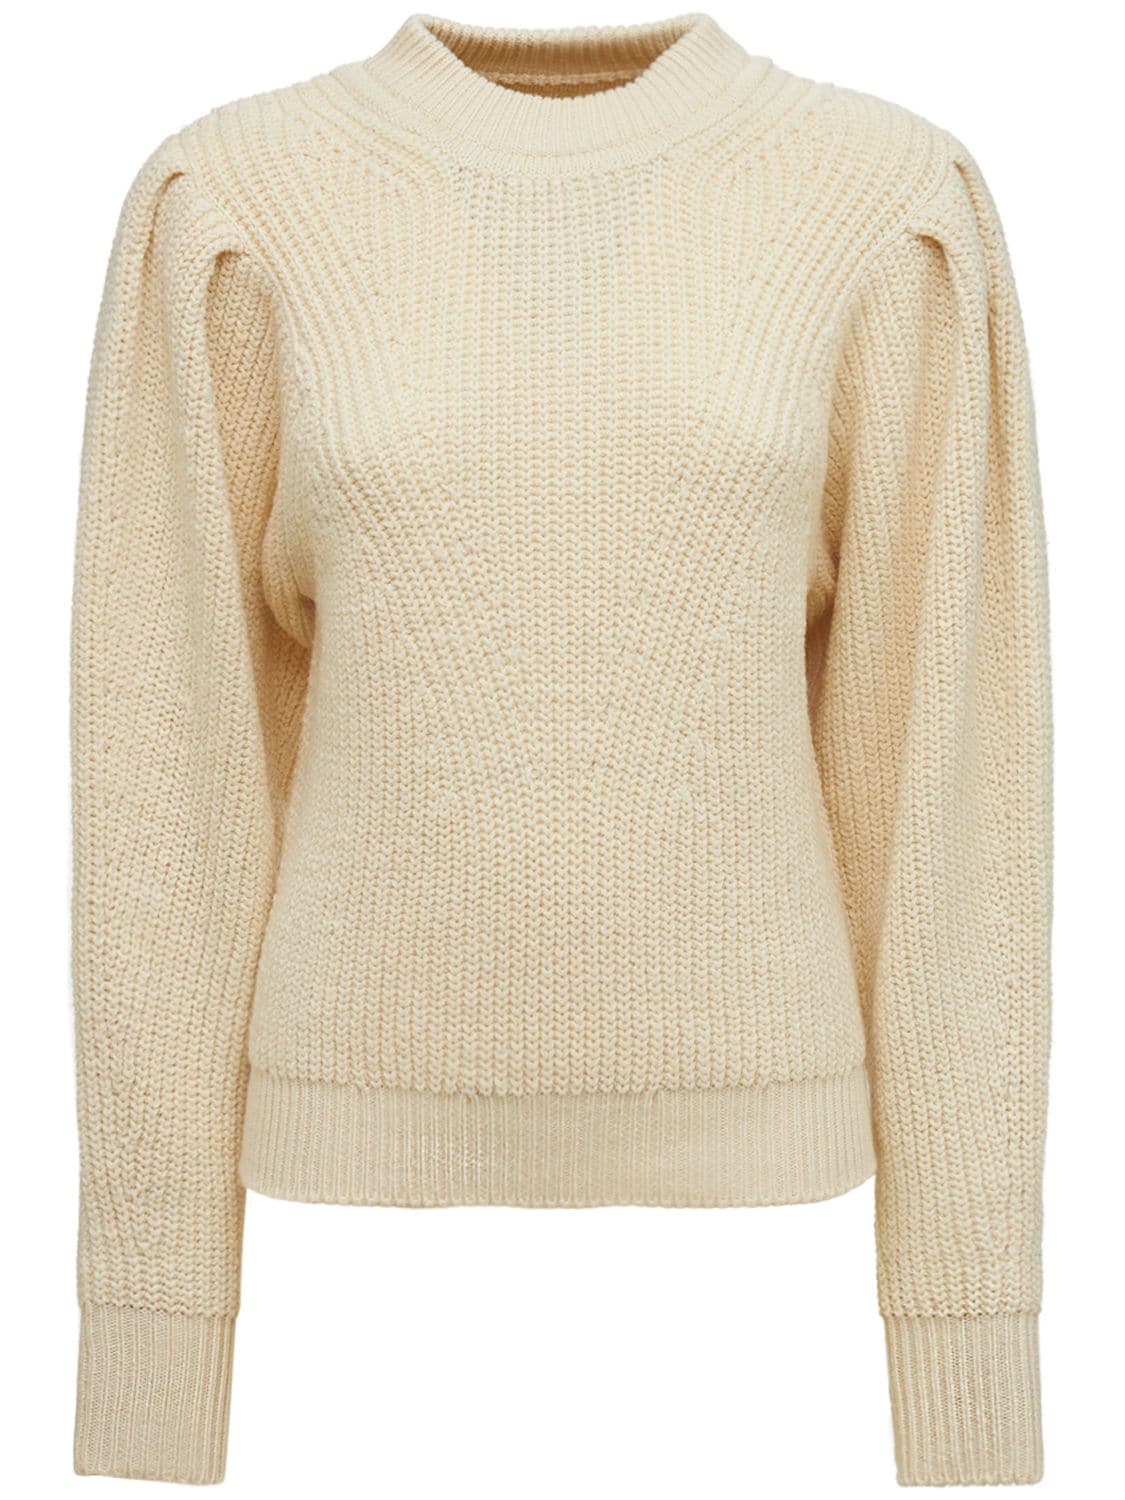 Adele Cotton Blend Knit Sweater